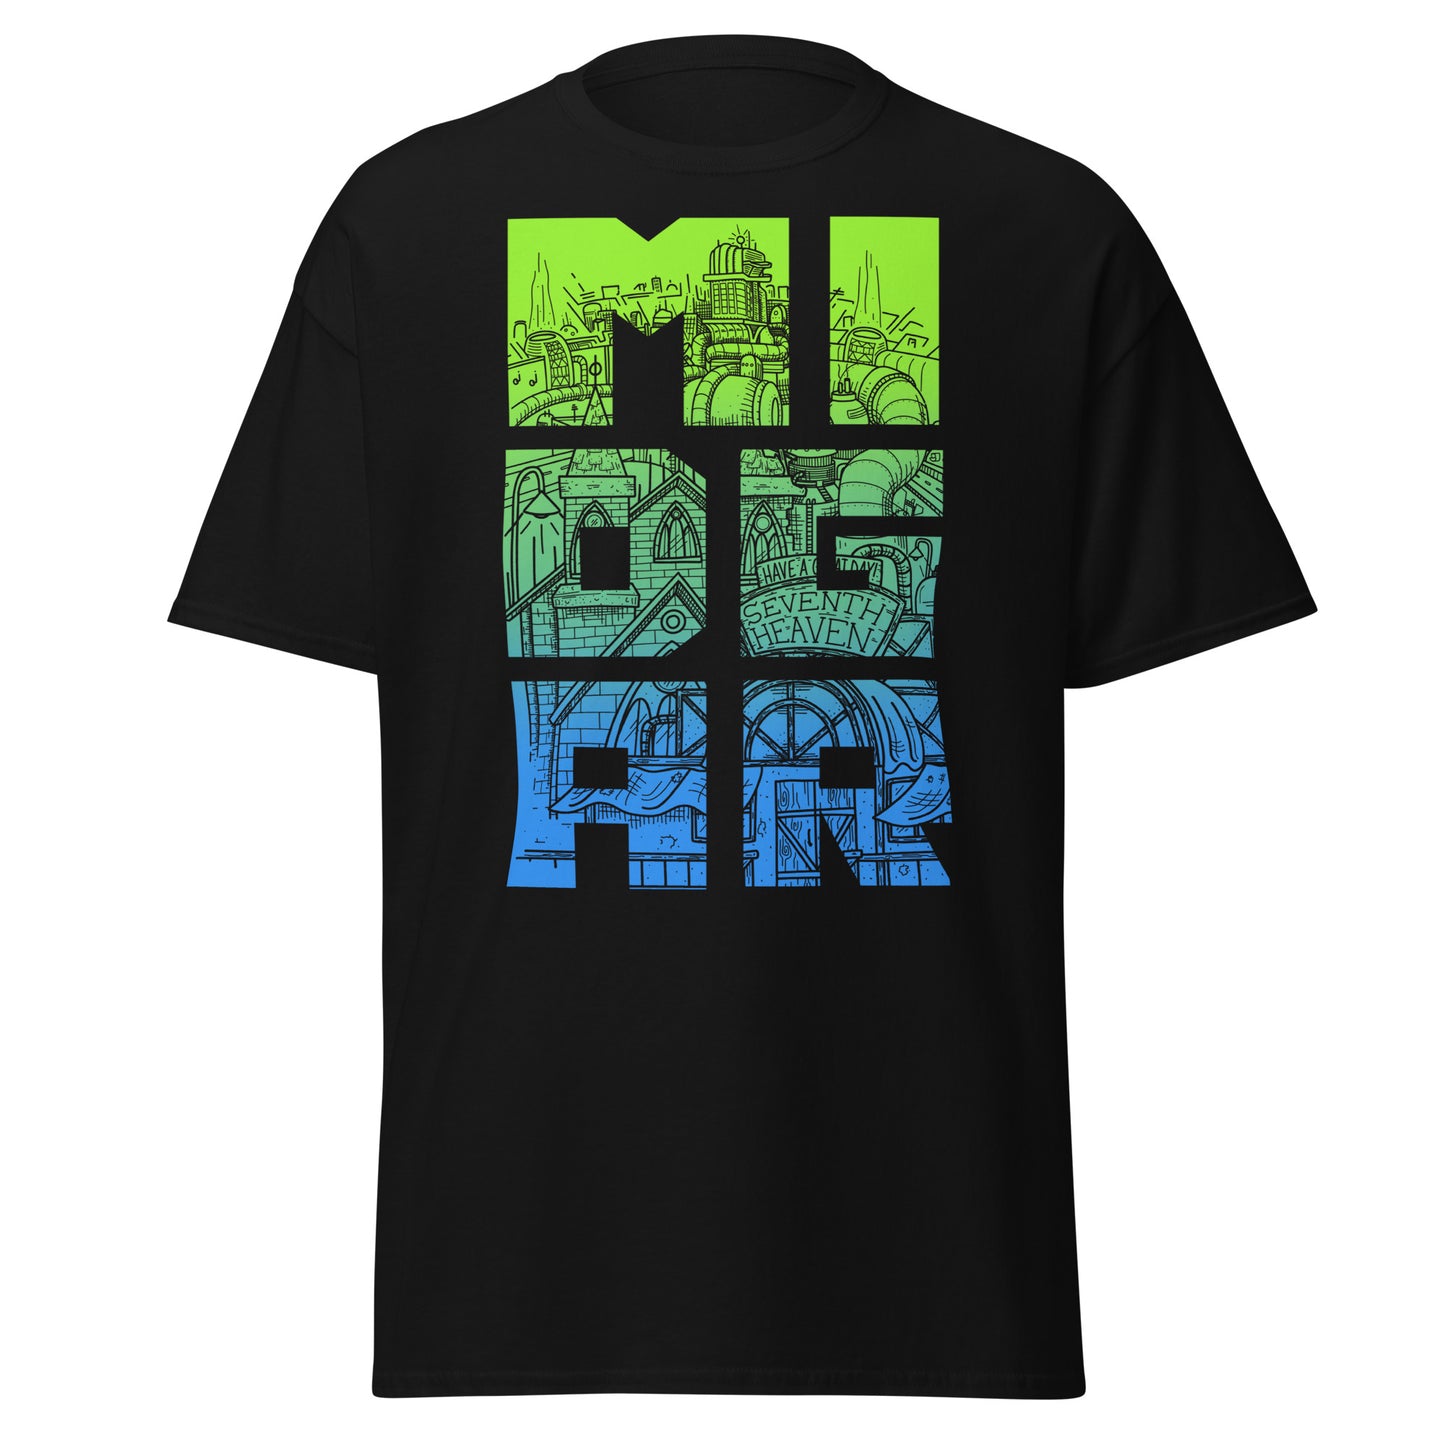 Midgar - Places Series T-Shirt for RPG Video Game Gamers